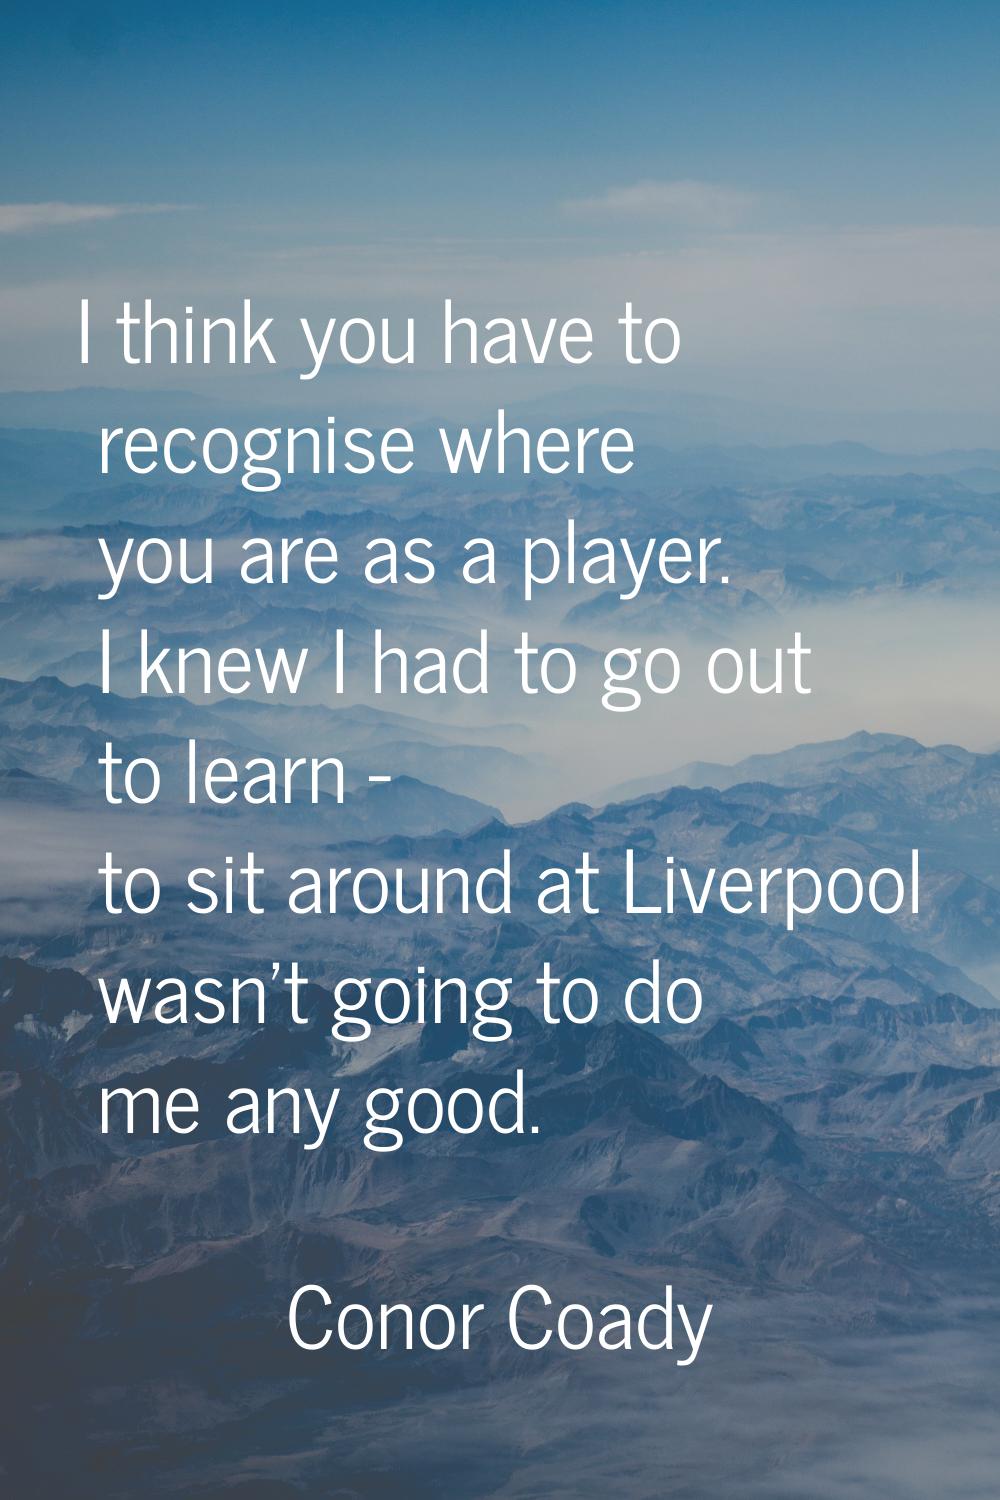 I think you have to recognise where you are as a player. I knew I had to go out to learn - to sit a